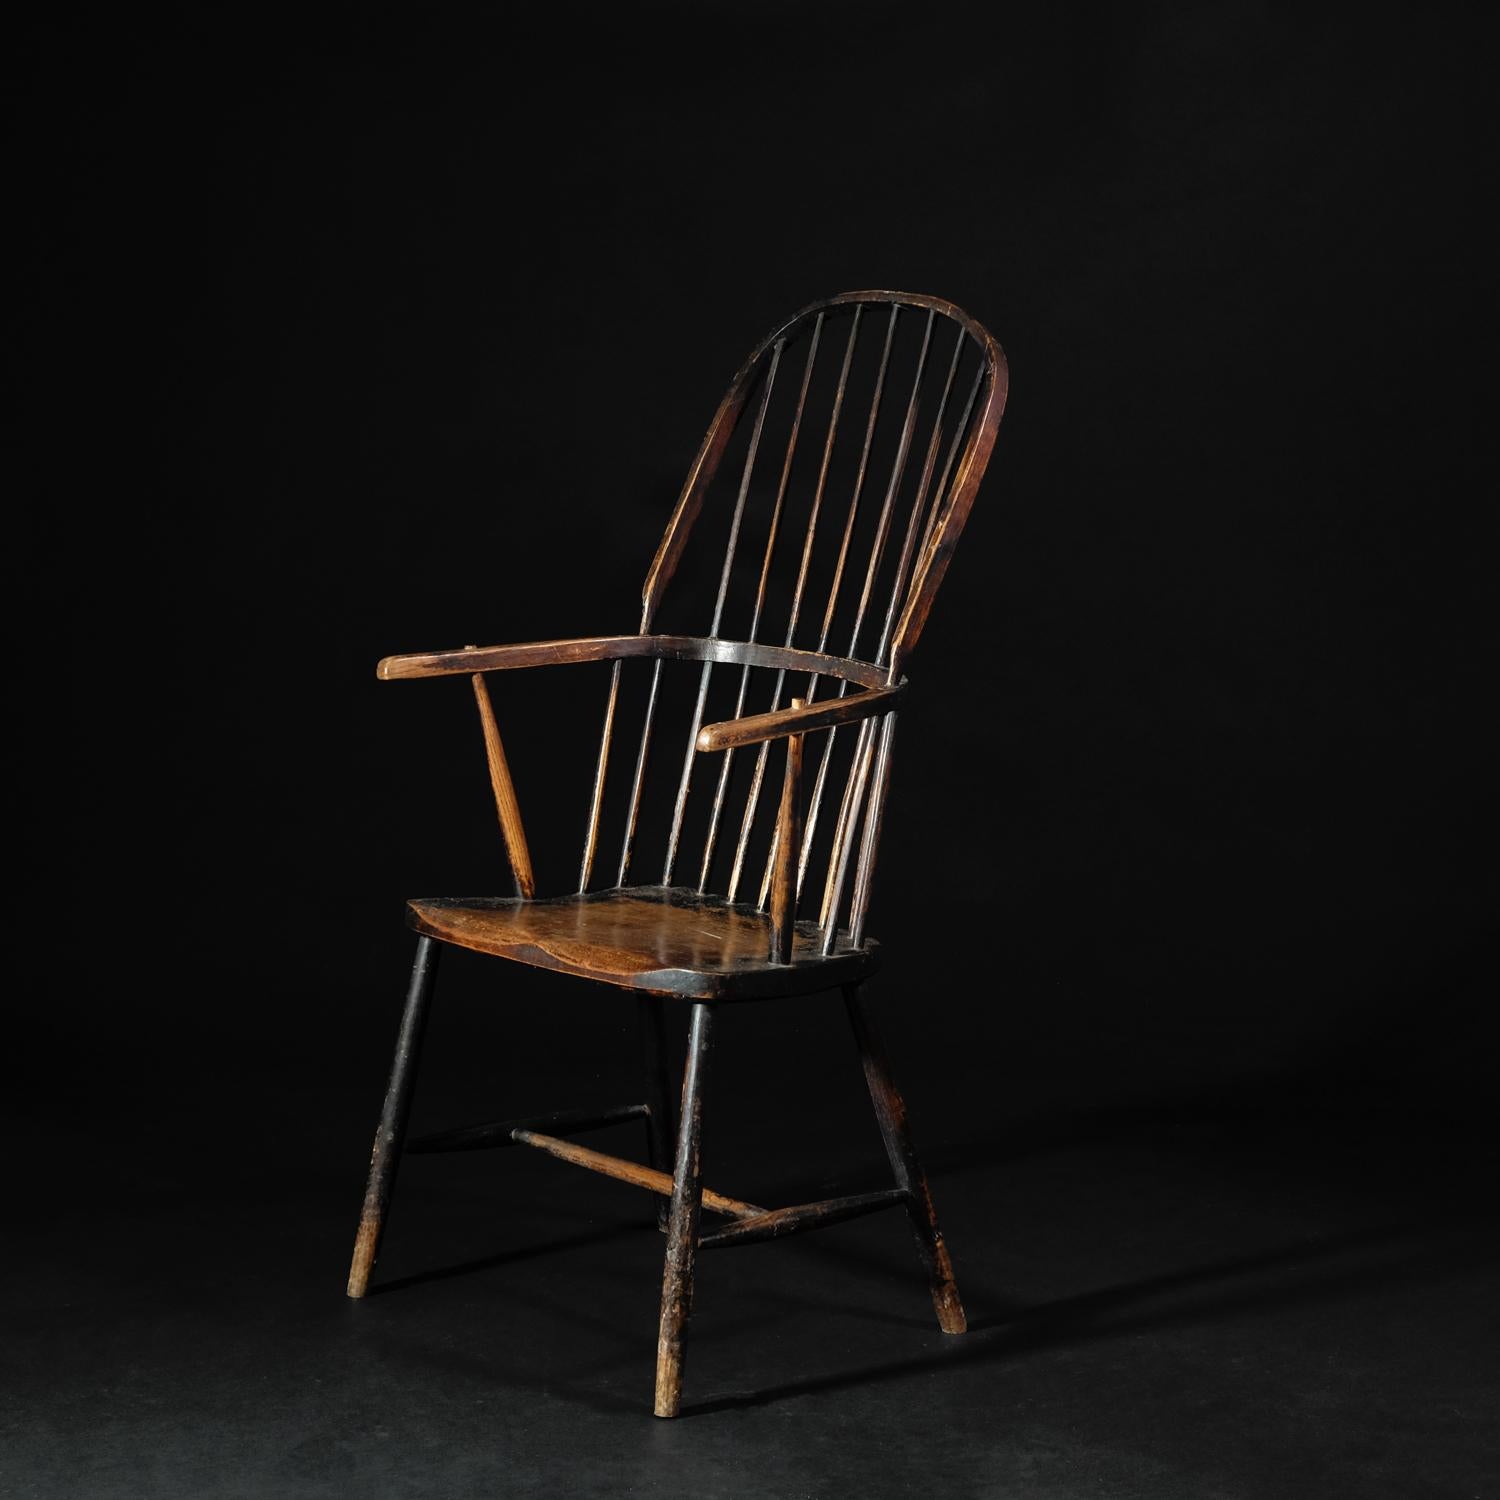 A scarce highly original example of an early 19th century West Country Windsor armchair. Plain tapered legs untied by an H-form stretcher. The solid elm seat with subtle saddle shaping. Two tapered arm supports and two plain stick supports with